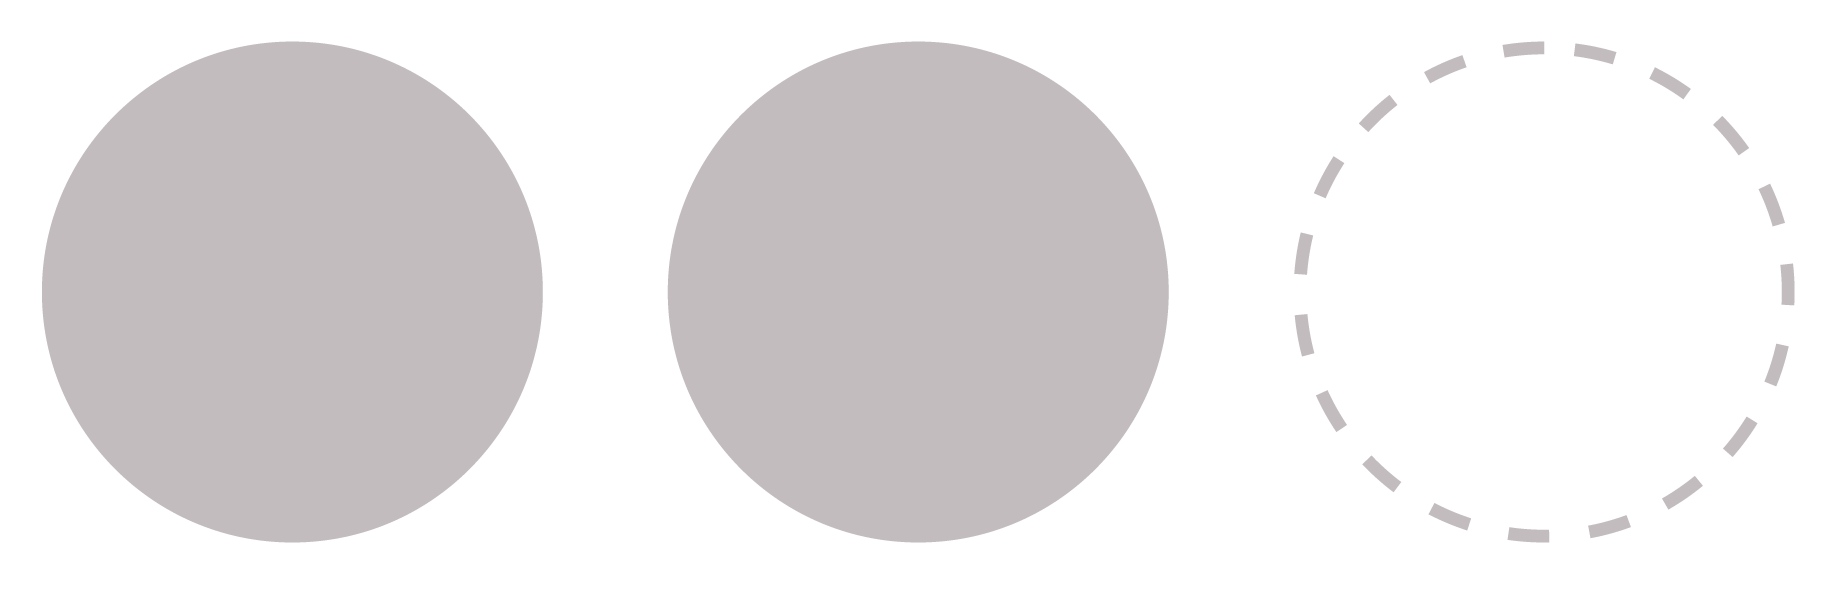 2 gray circles and 1 empty circle with a dashed outline.